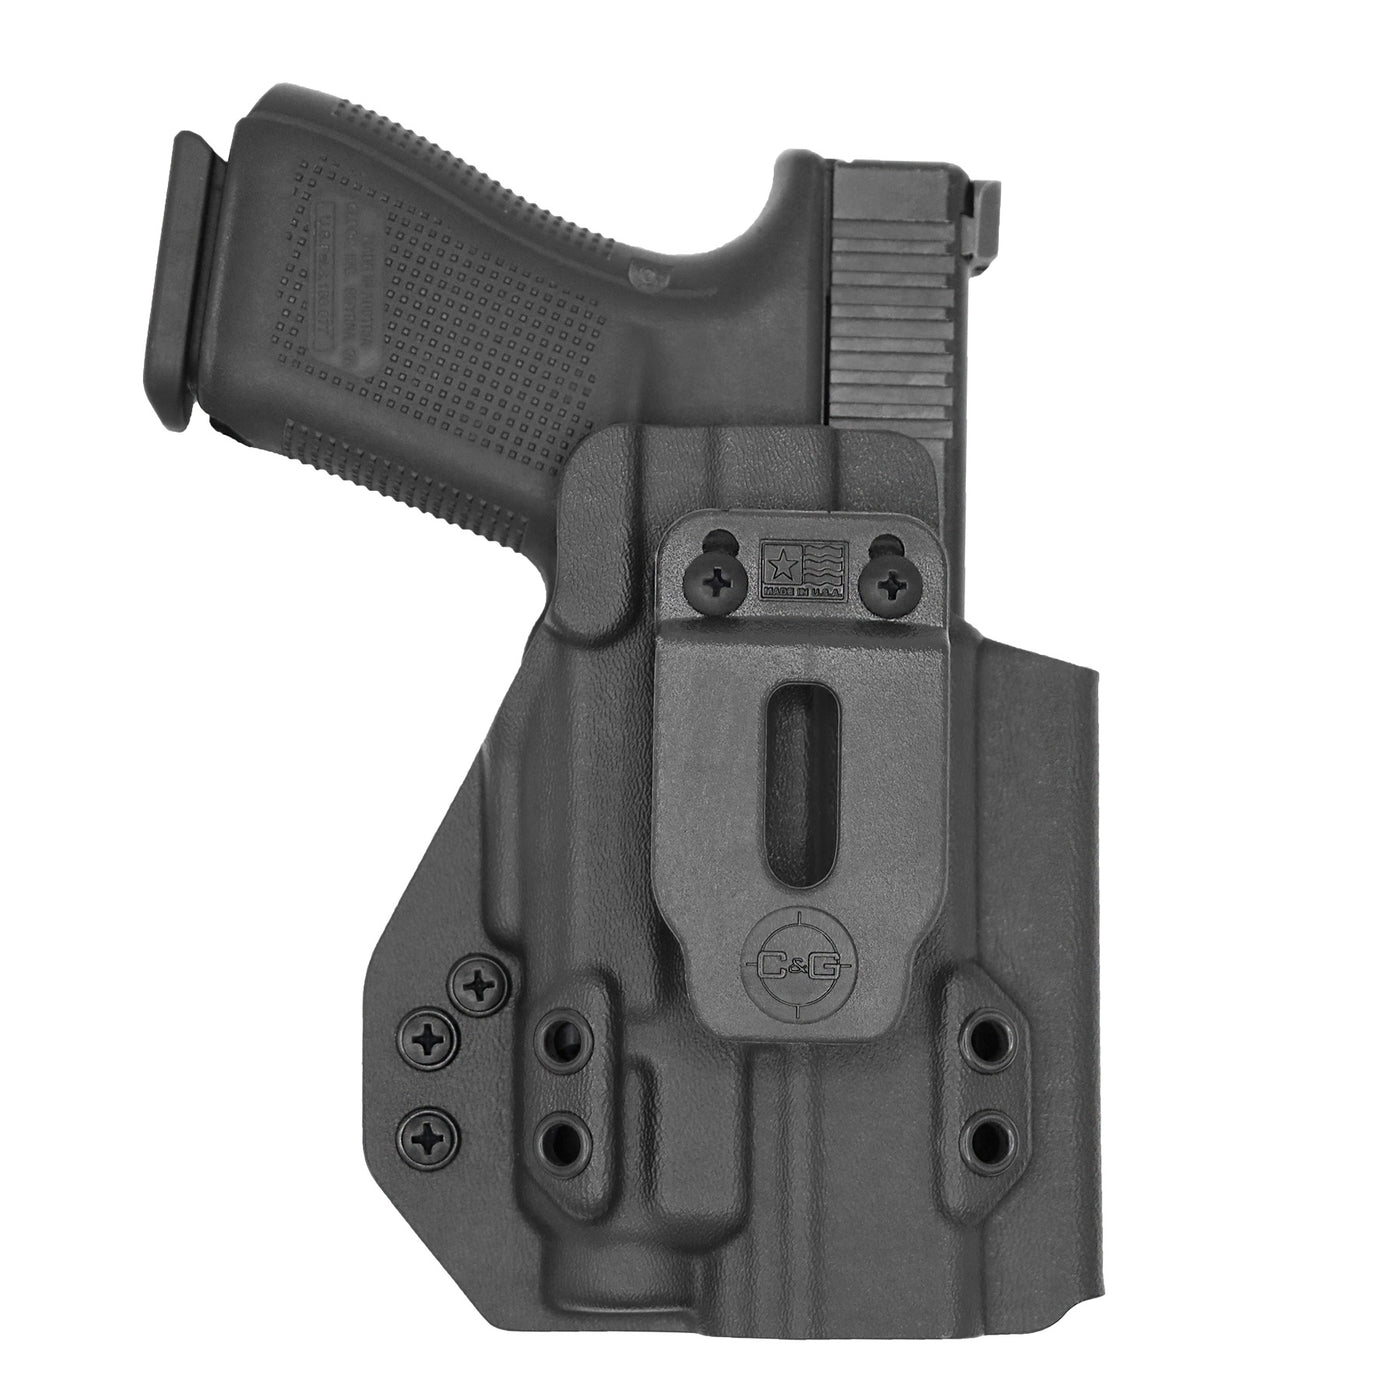 C&G Holsters Quickship IWB Tactical Glock 20/21 Streamlight TLR7/a in holstered position